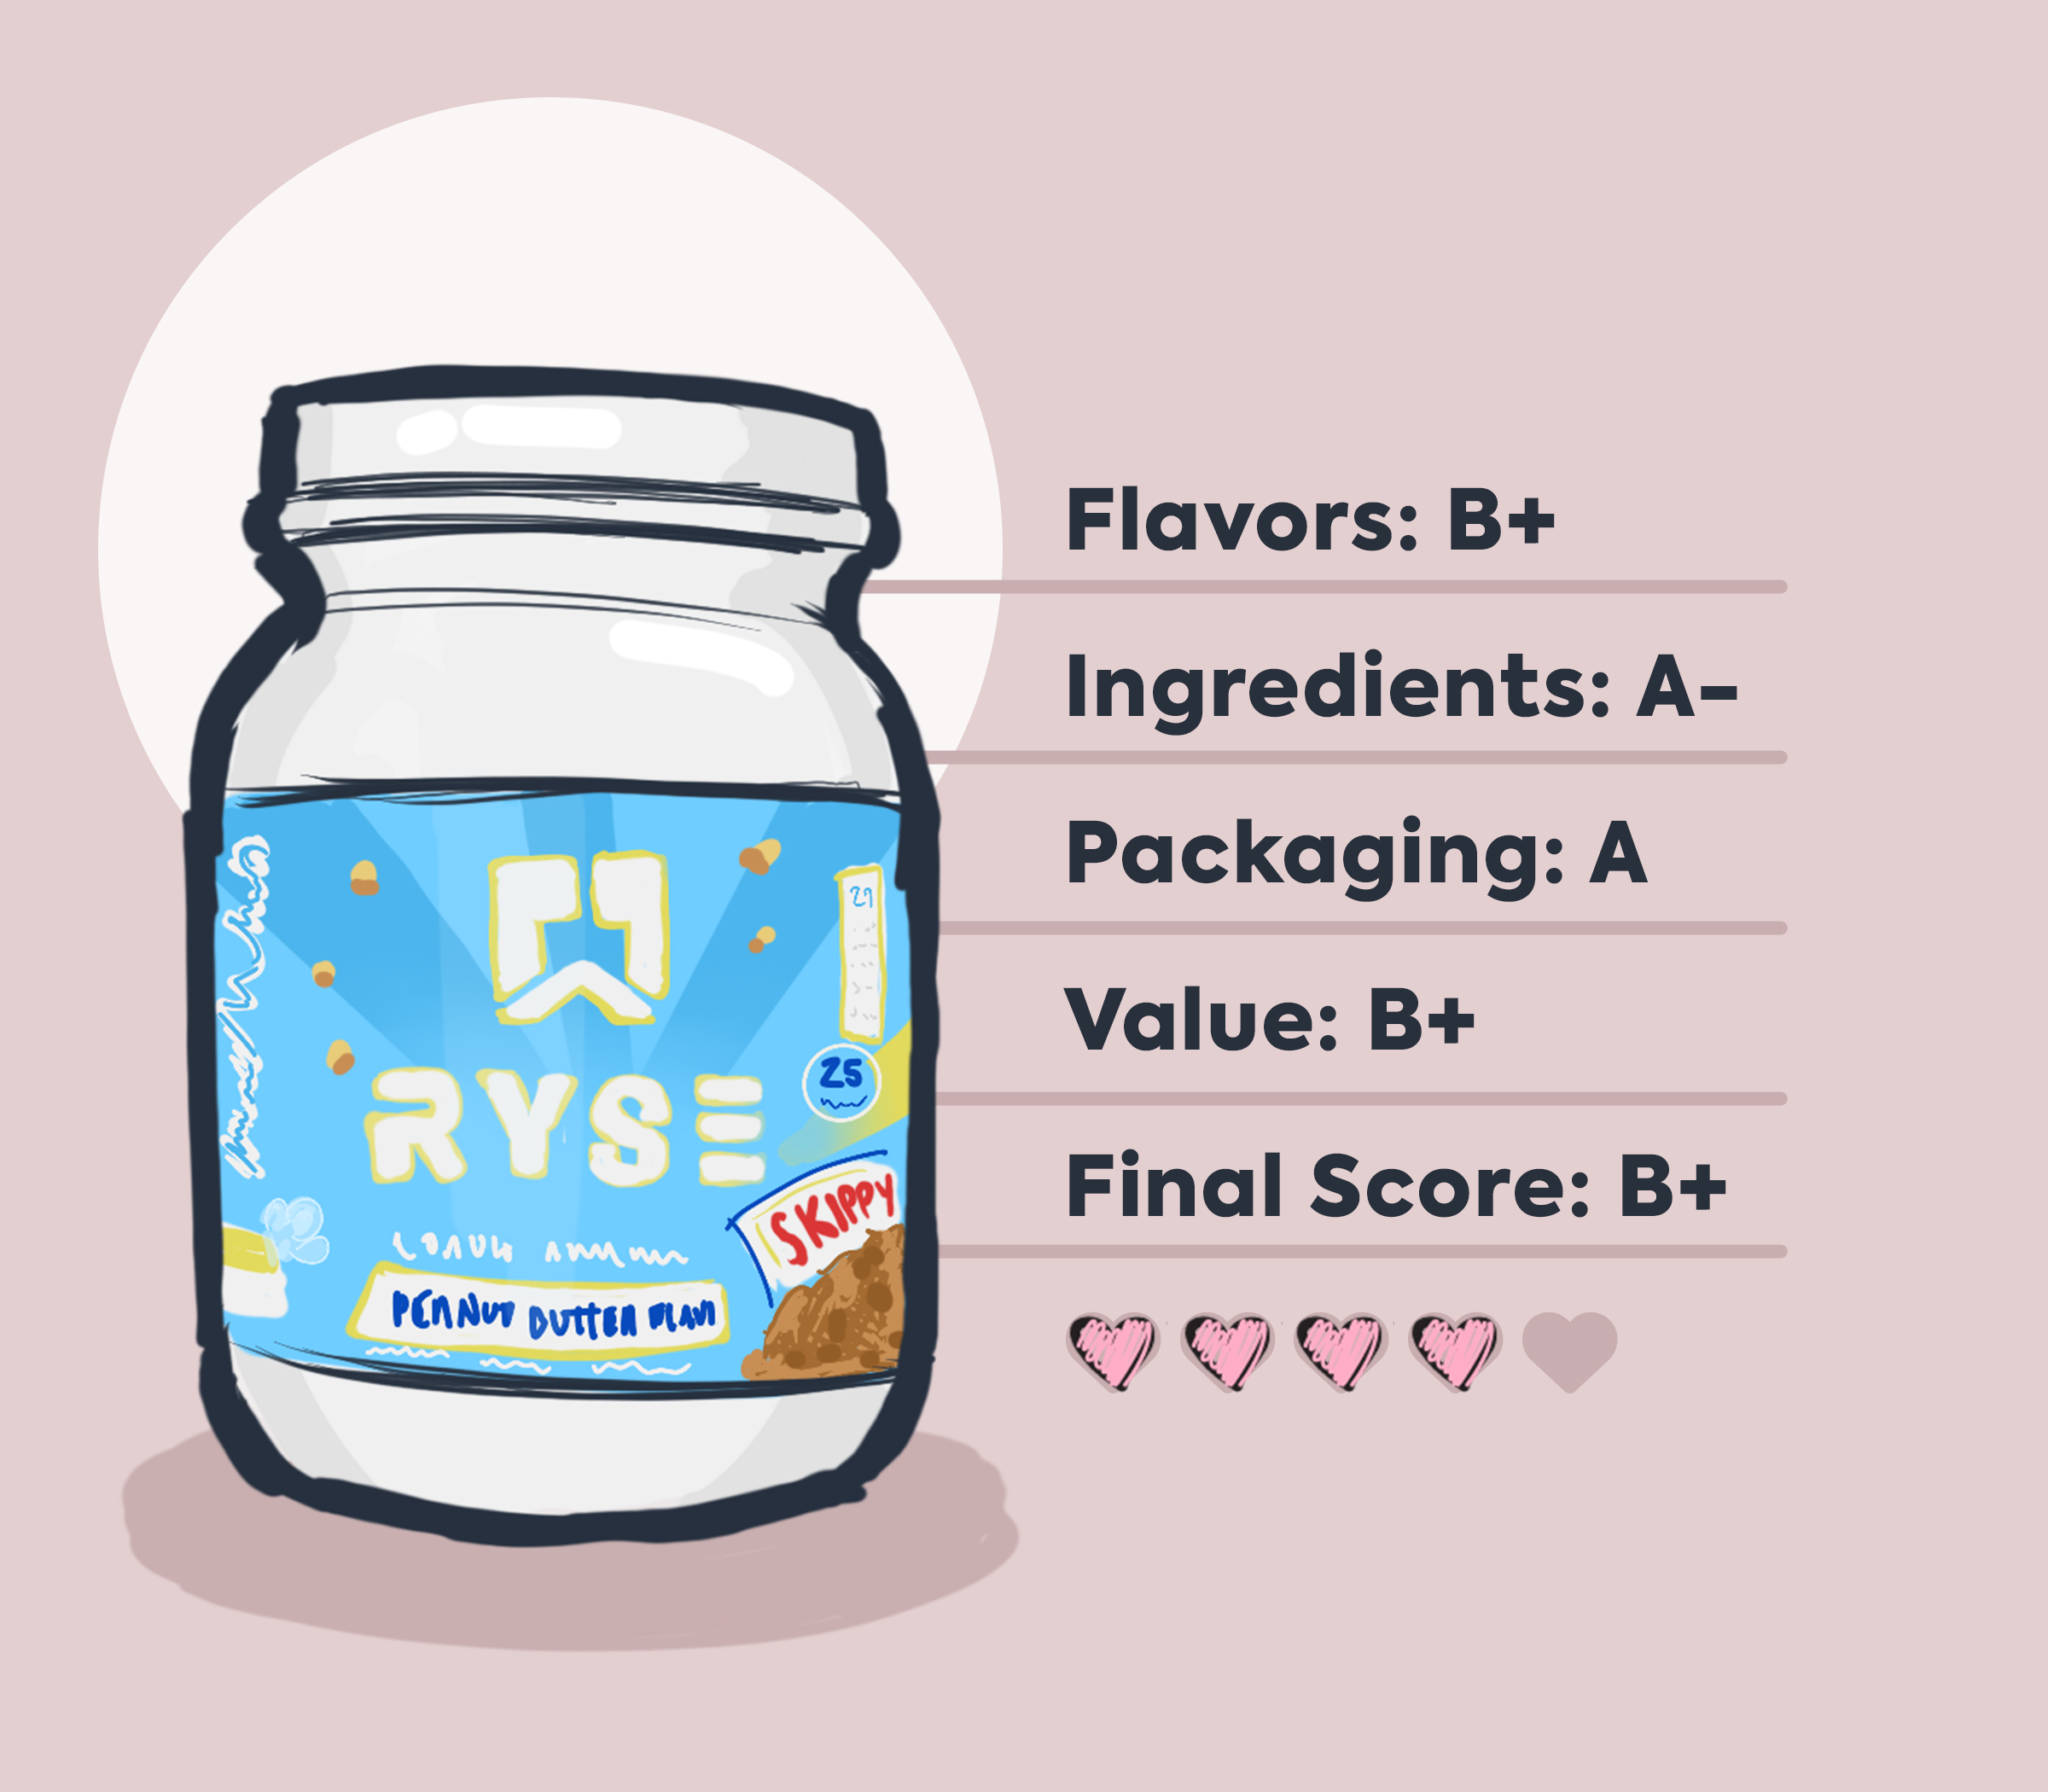 Ryse Protein Skippy Peanut Butter flavor packaging illustration with review score data on blush pink background 